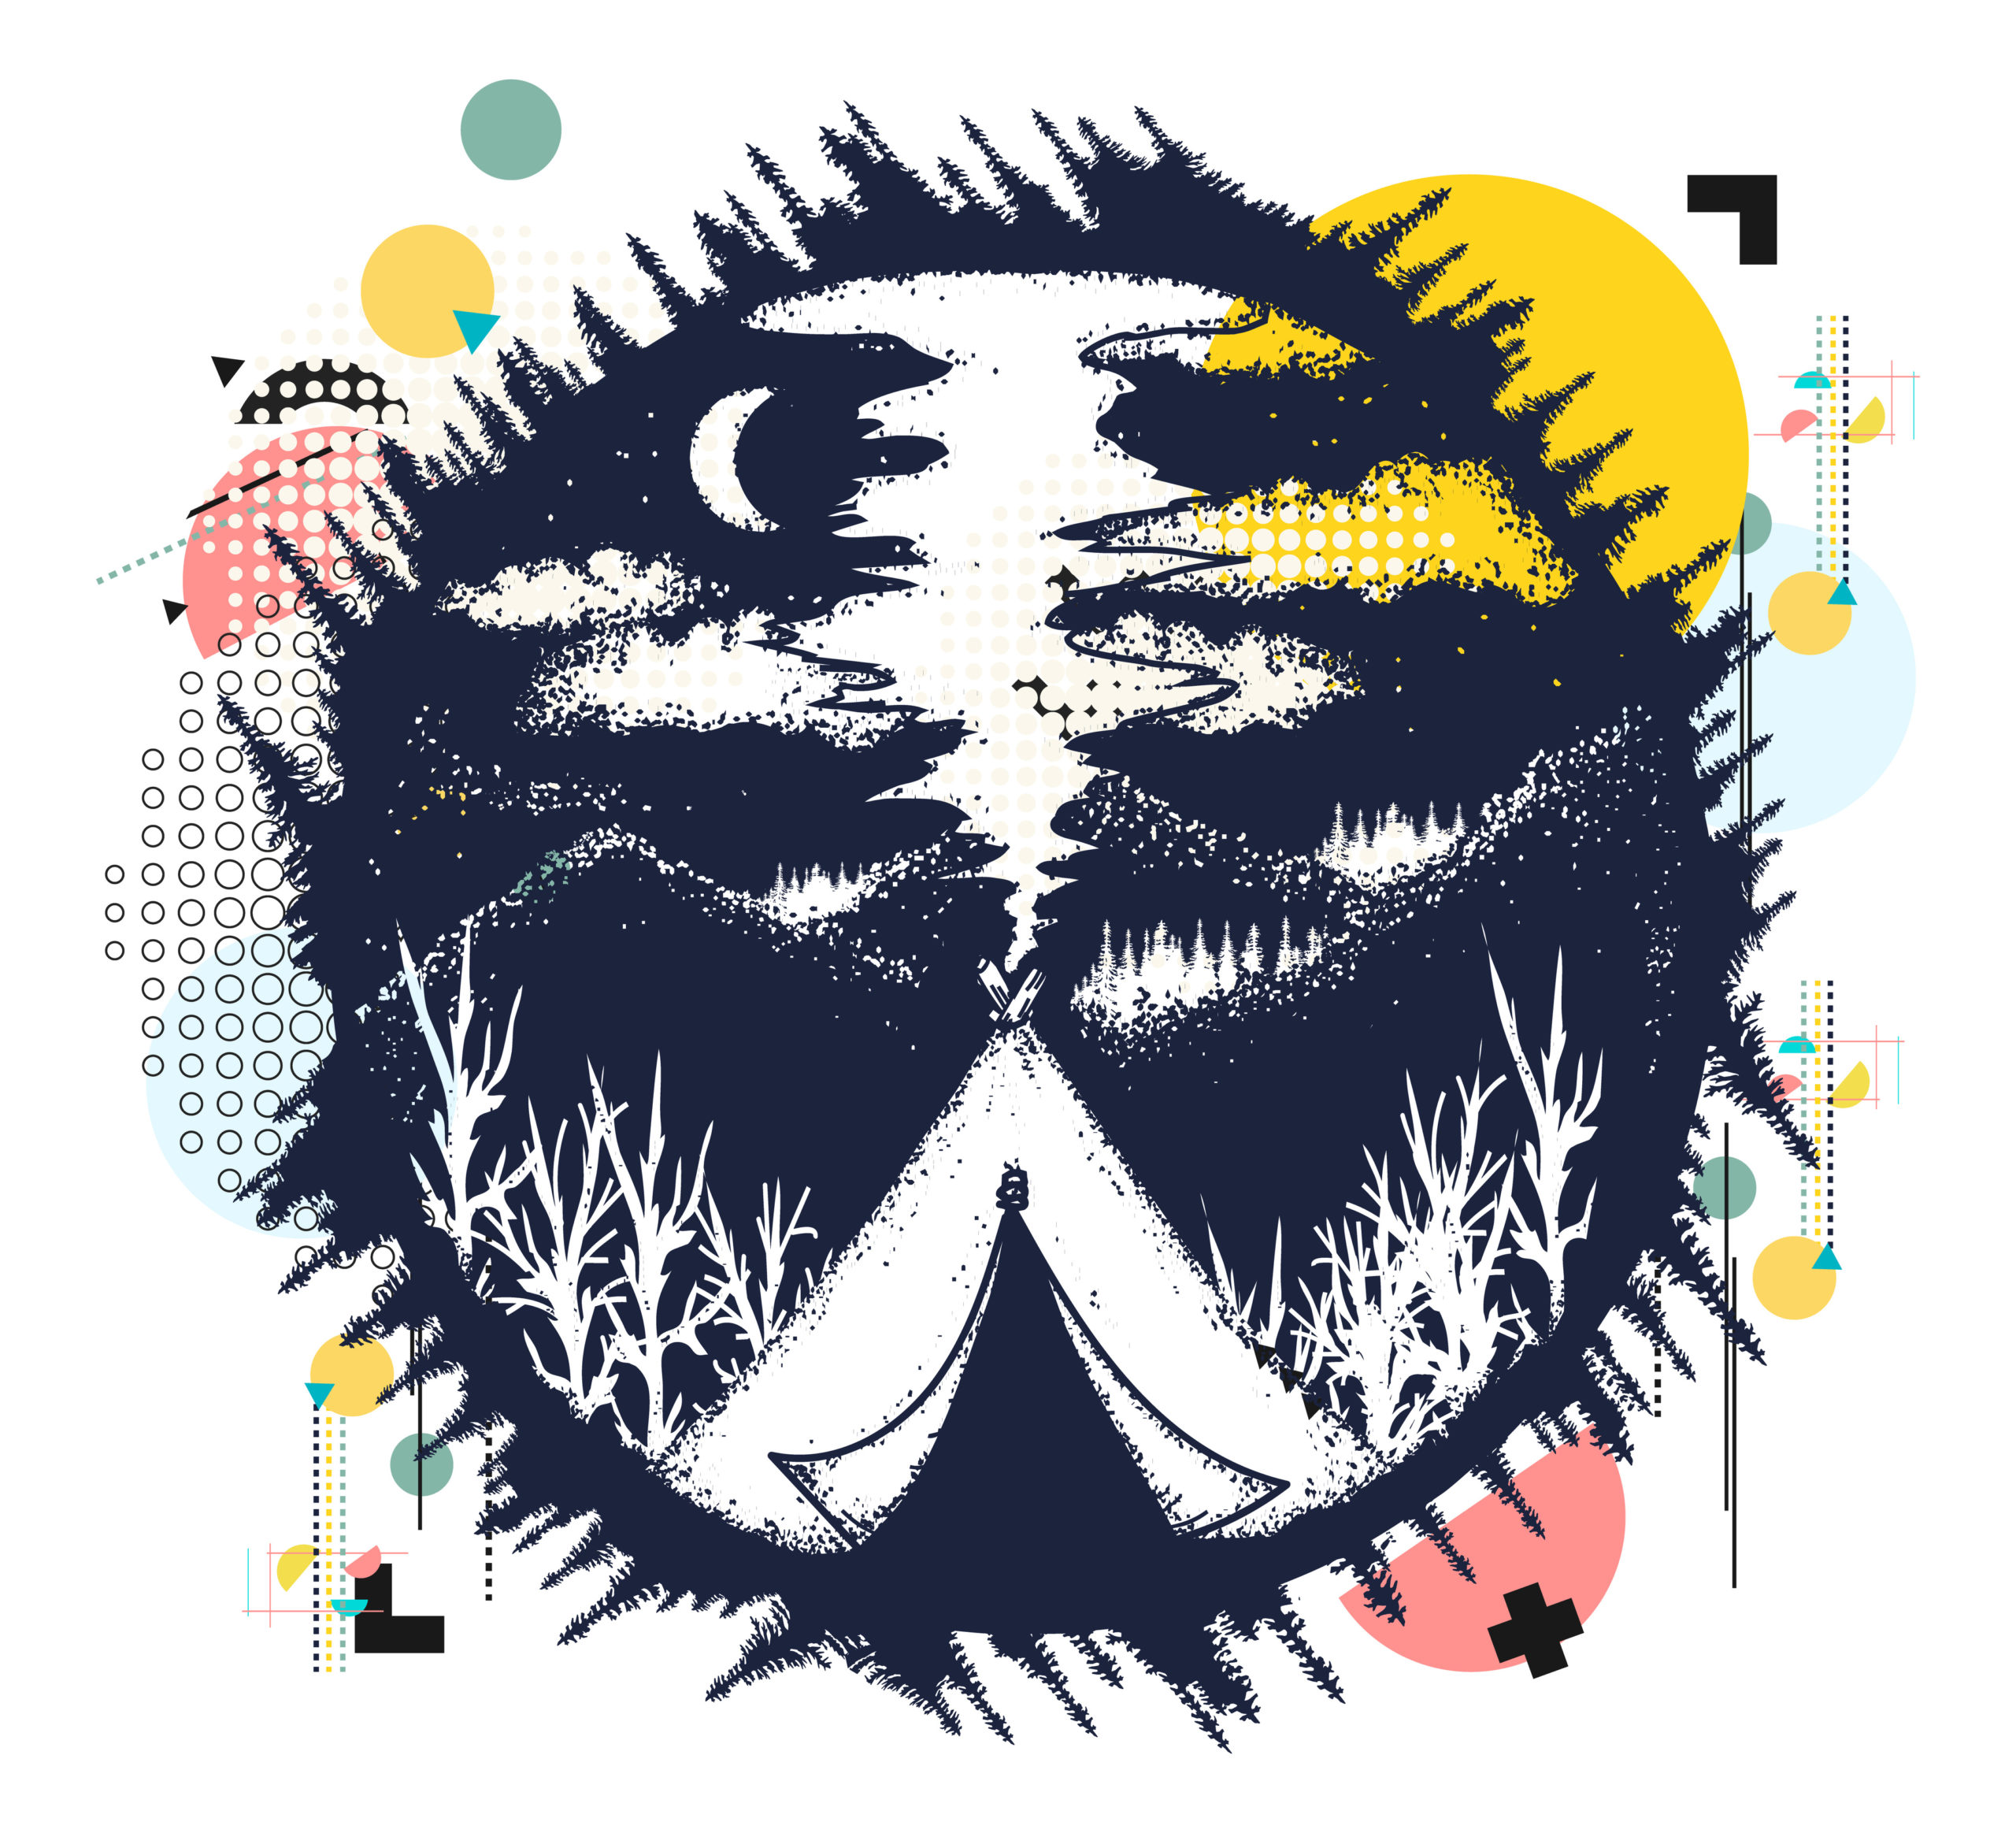 Tent in mountains. Travel symbol, tourism, extreme sports, outdoor. Camping. Zine culture concept. Hand drawn vector glitch tattoo, contemporary cyberpunk collage.